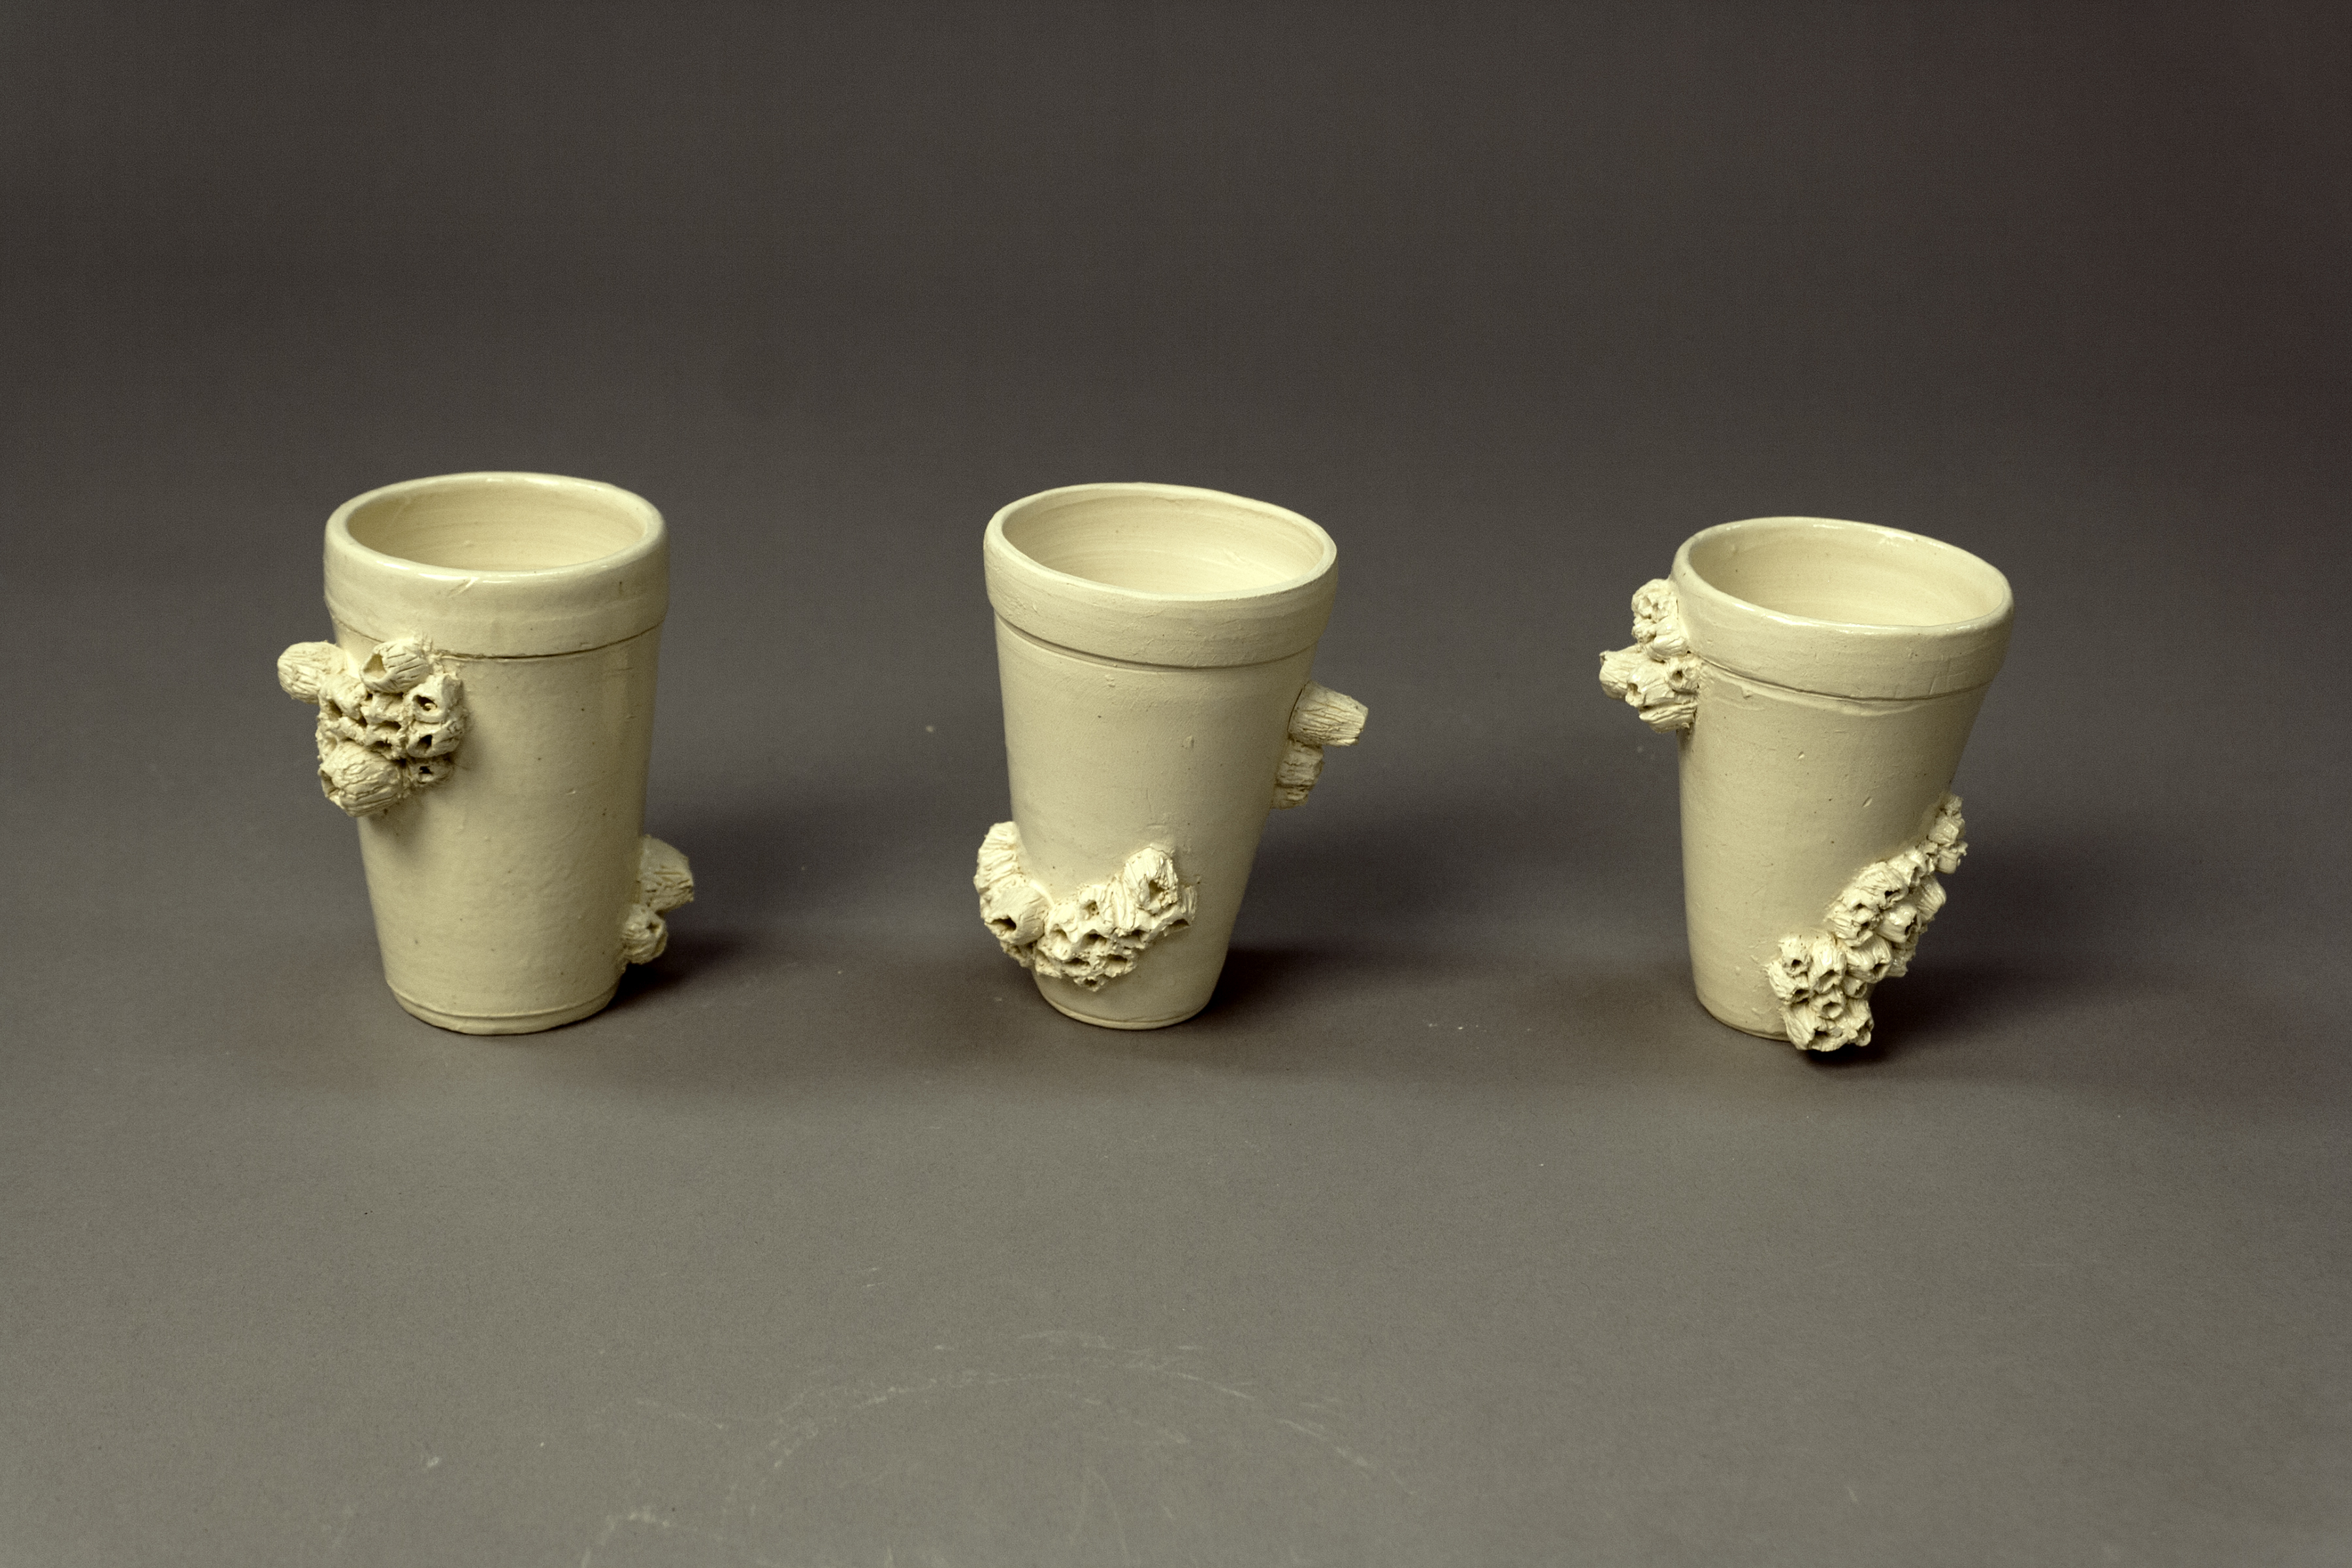 3 ceramic cups that look like styrofoam cups with barnacles growing all over them. 